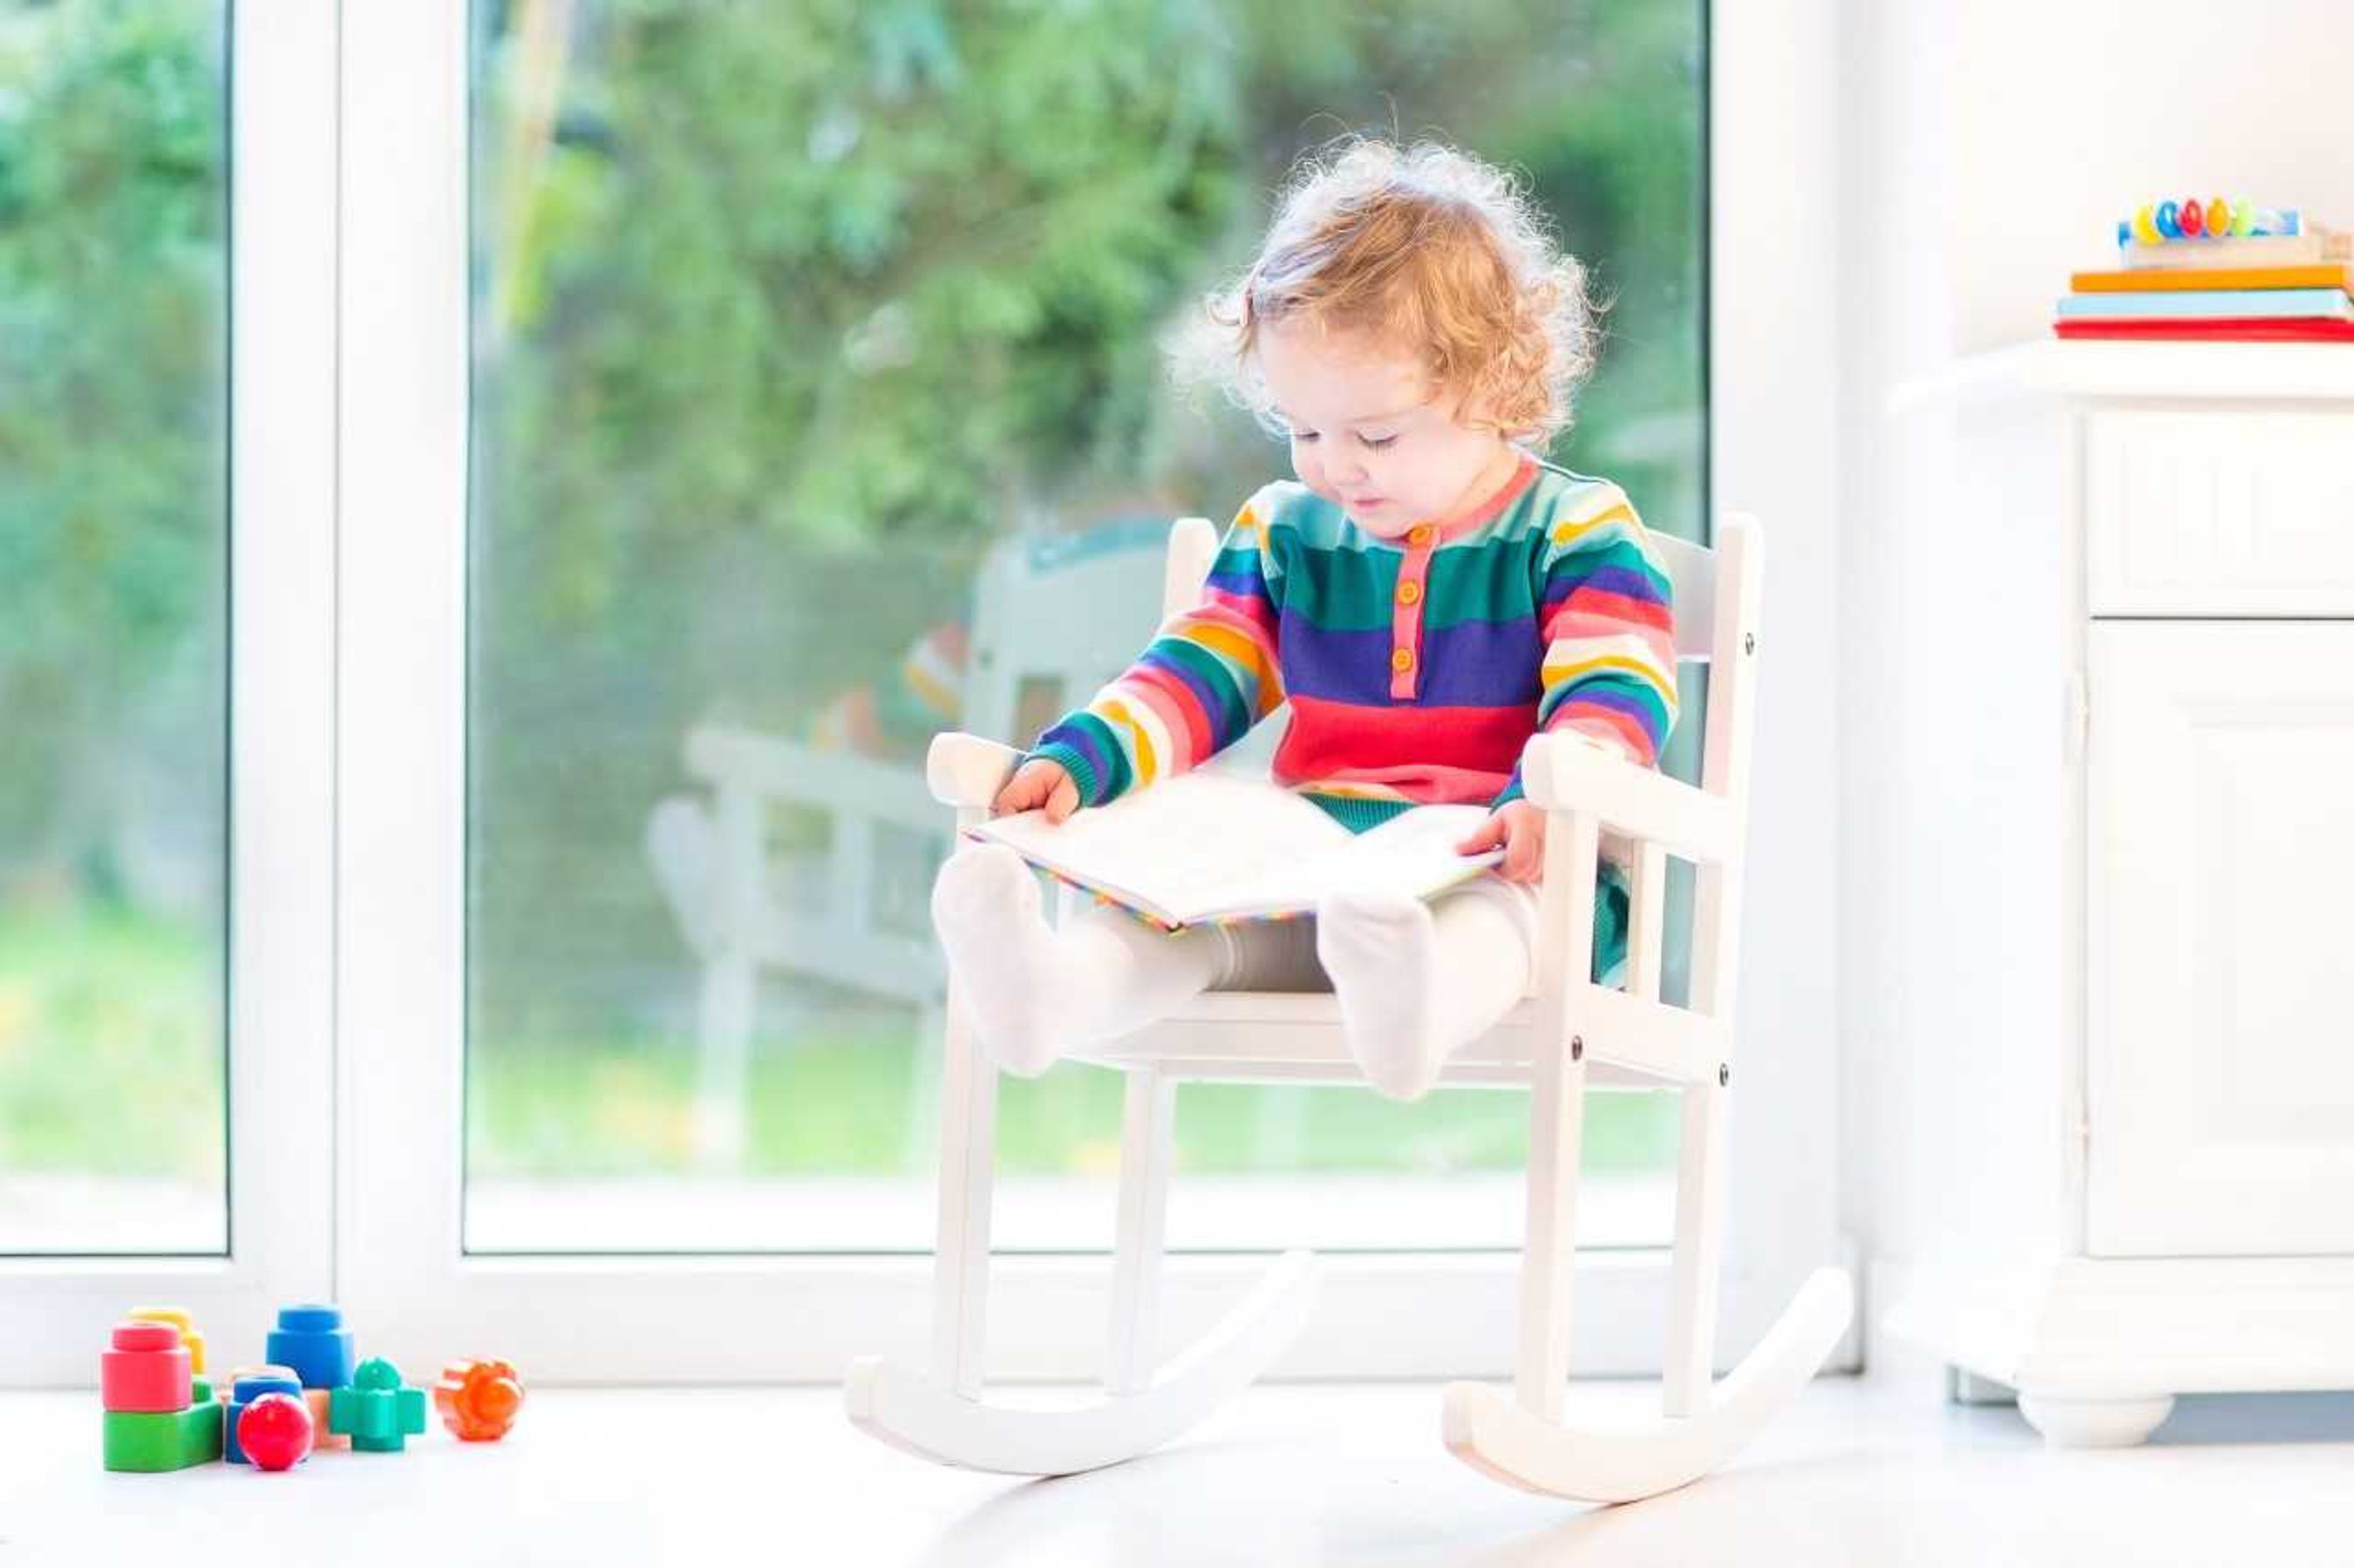 child reading a book on a rocking chair.jpg